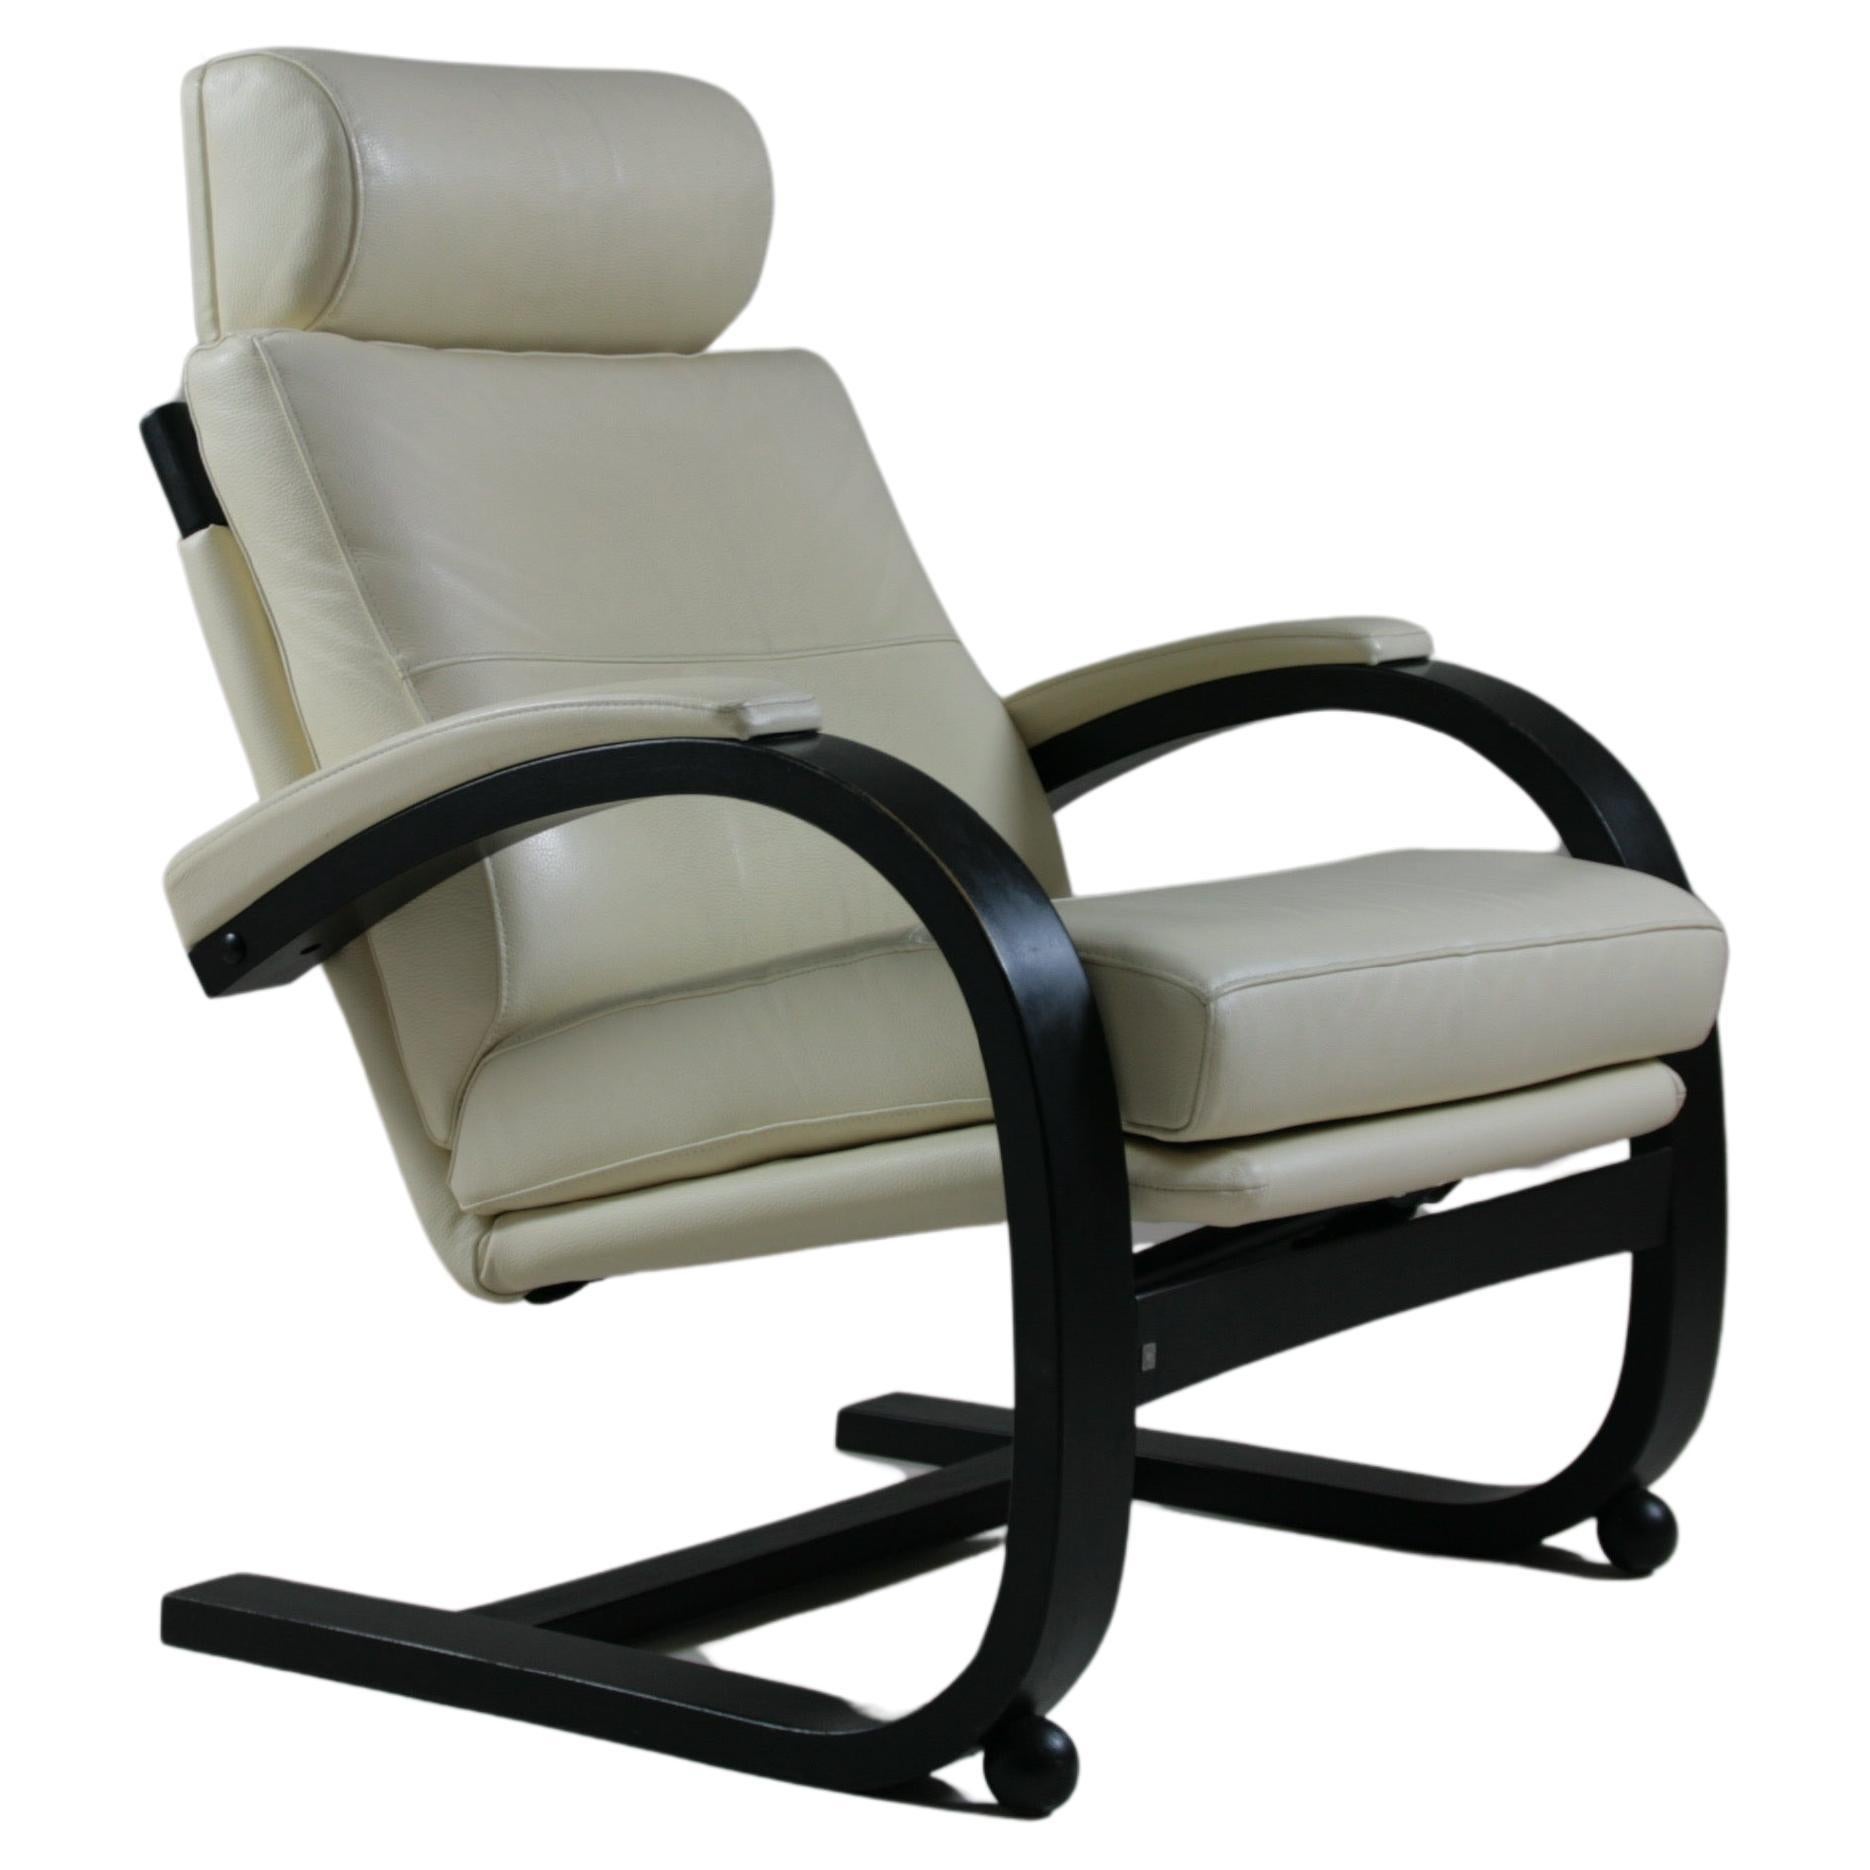 Nelo Swedish leather recliner armchair by åke fribyter For Sale